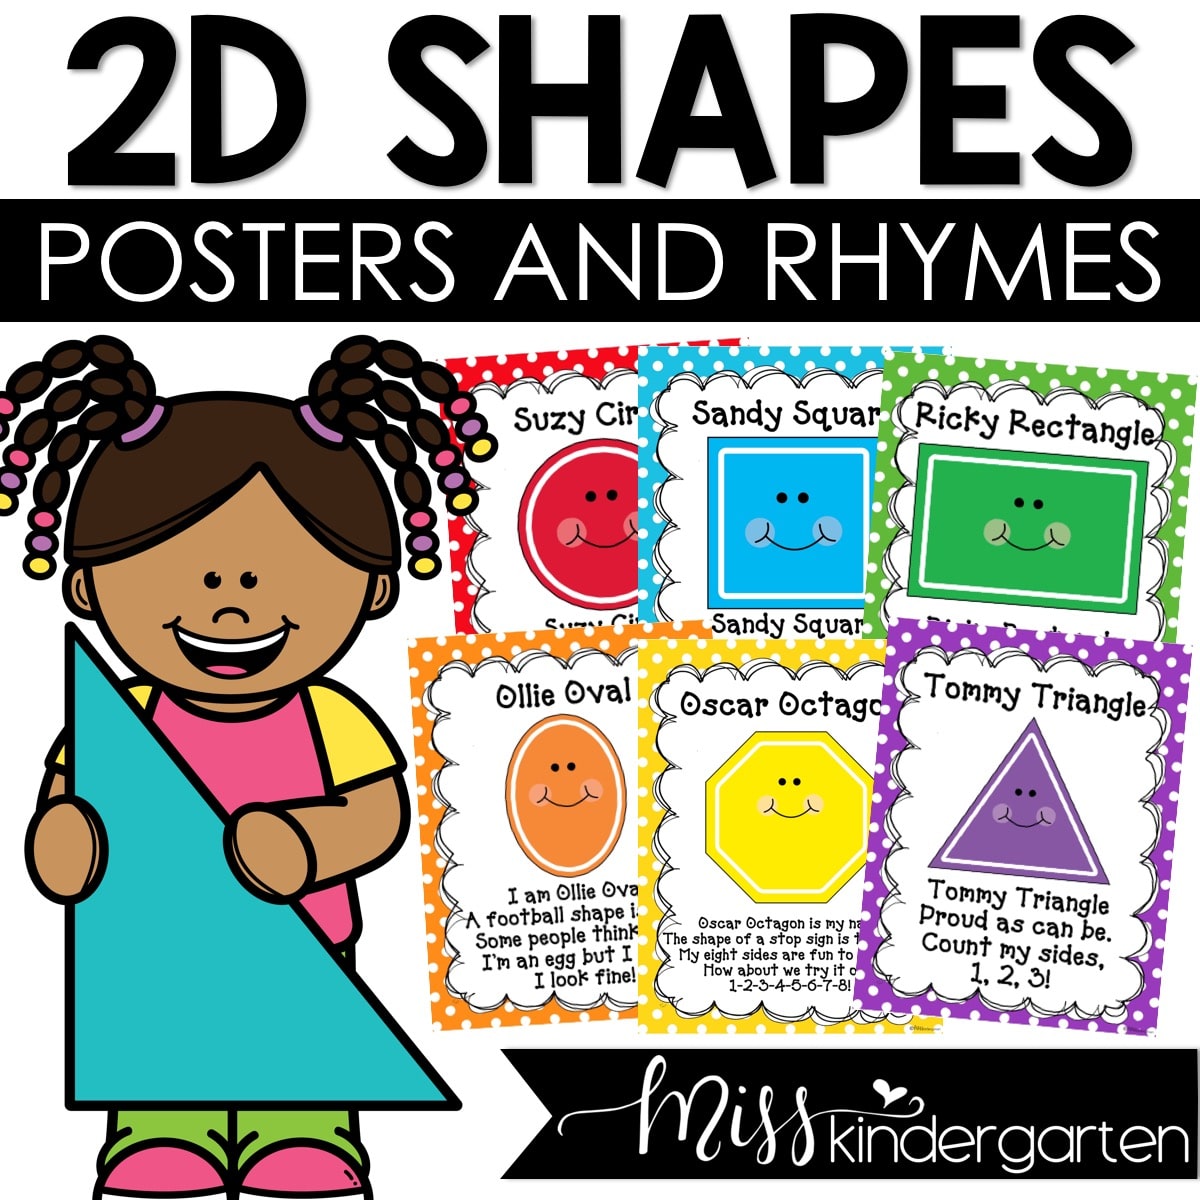 2D Shape Posters and Rhymes